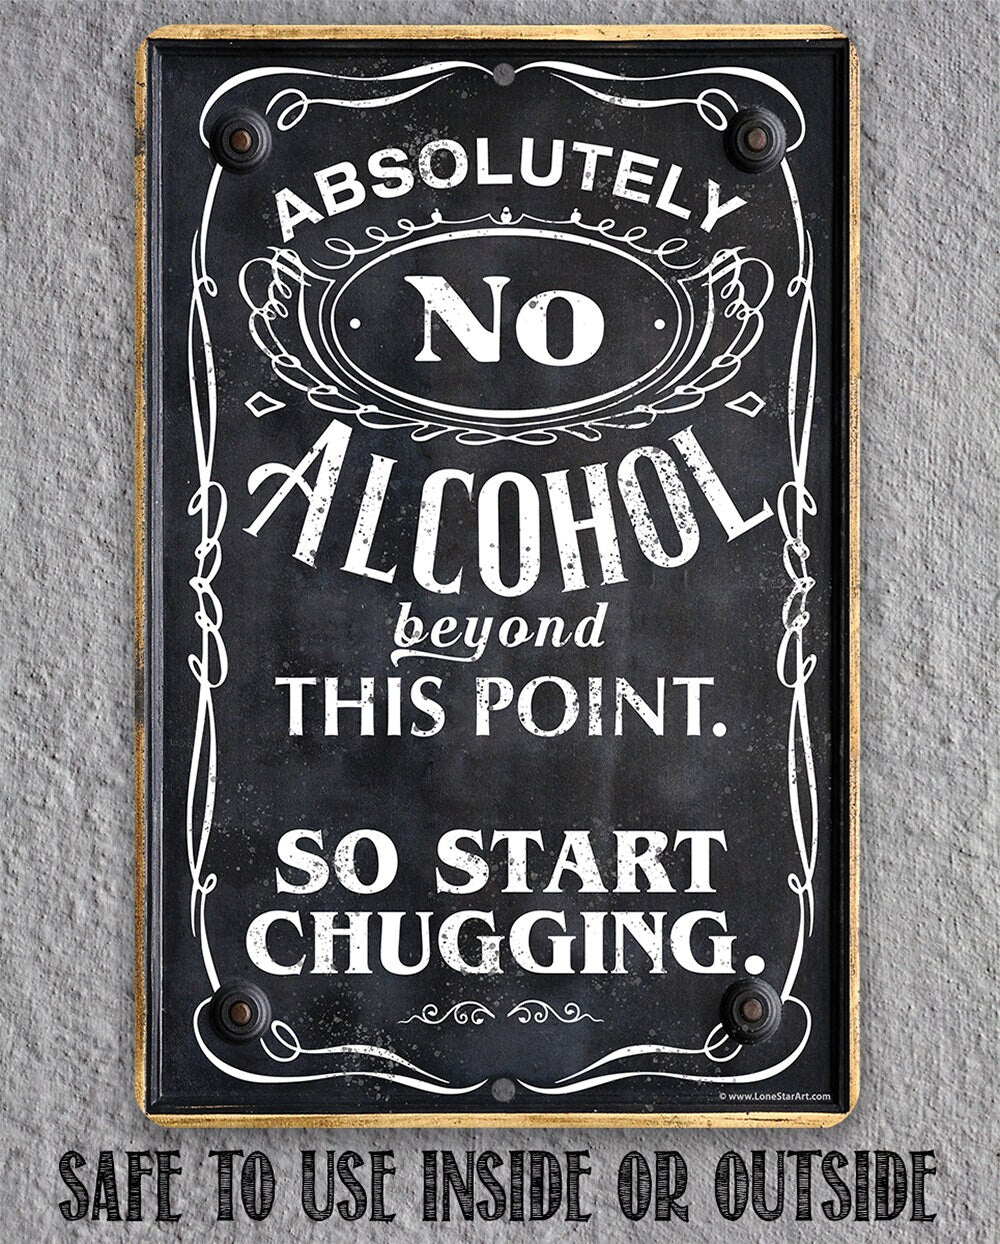 Bar Themed Durable Metal Sign-Absolutely No Alcohol Beyond This Point, So Start Chugging 8"x12" or 12"x18" Use Indoor/Outdoor Decor and Gift